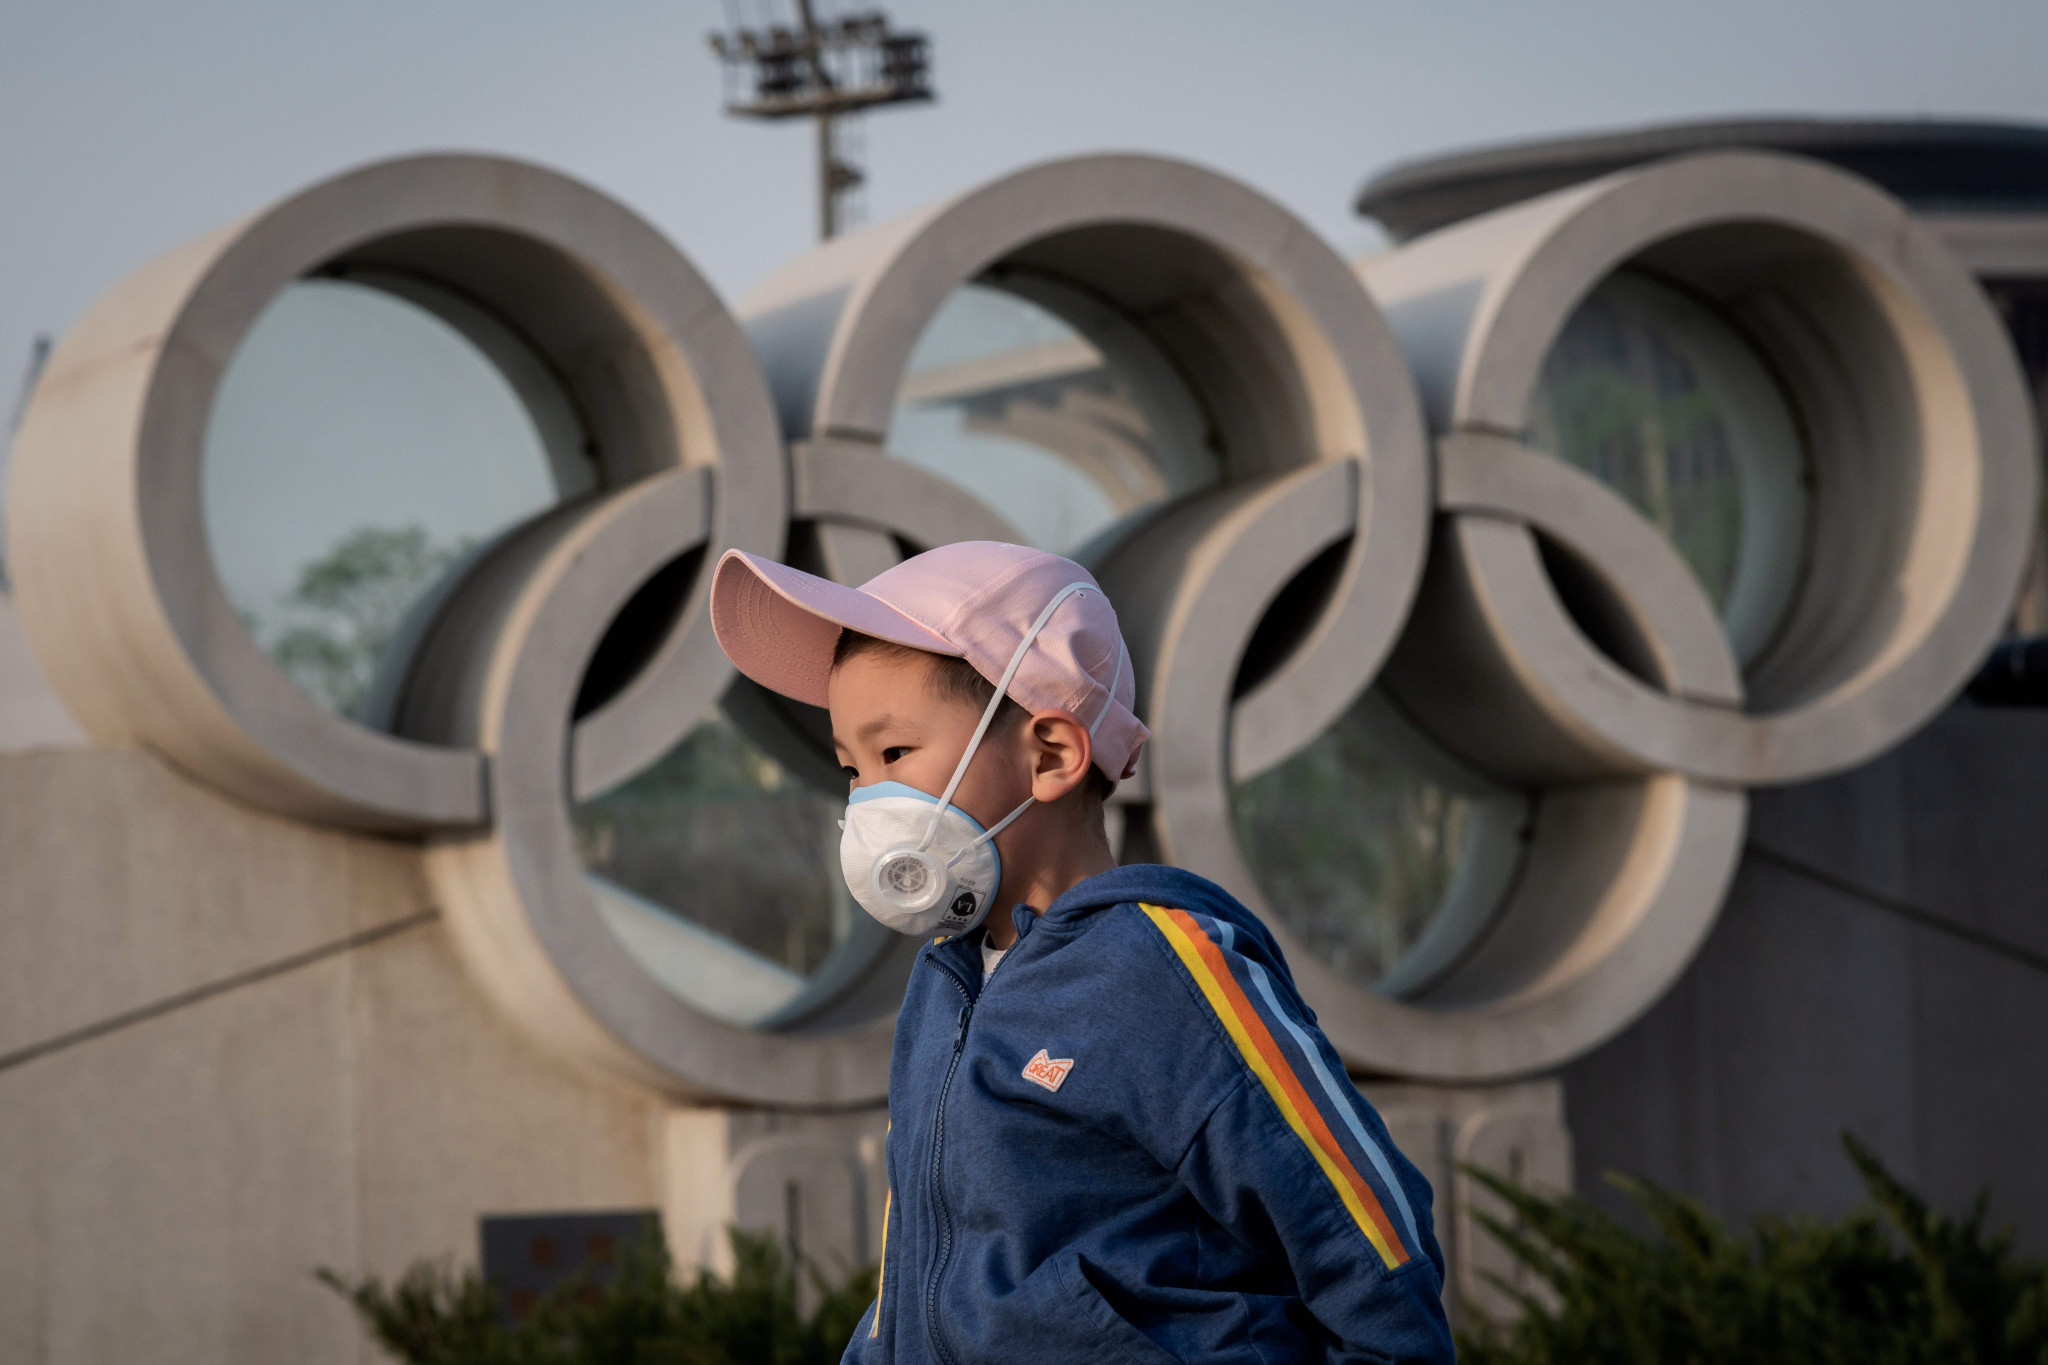 There has been mounting pressure to postpone the Tokyo 2020 Olympic and Paralympic Games due to the coronavirus crisis ©Getty Images